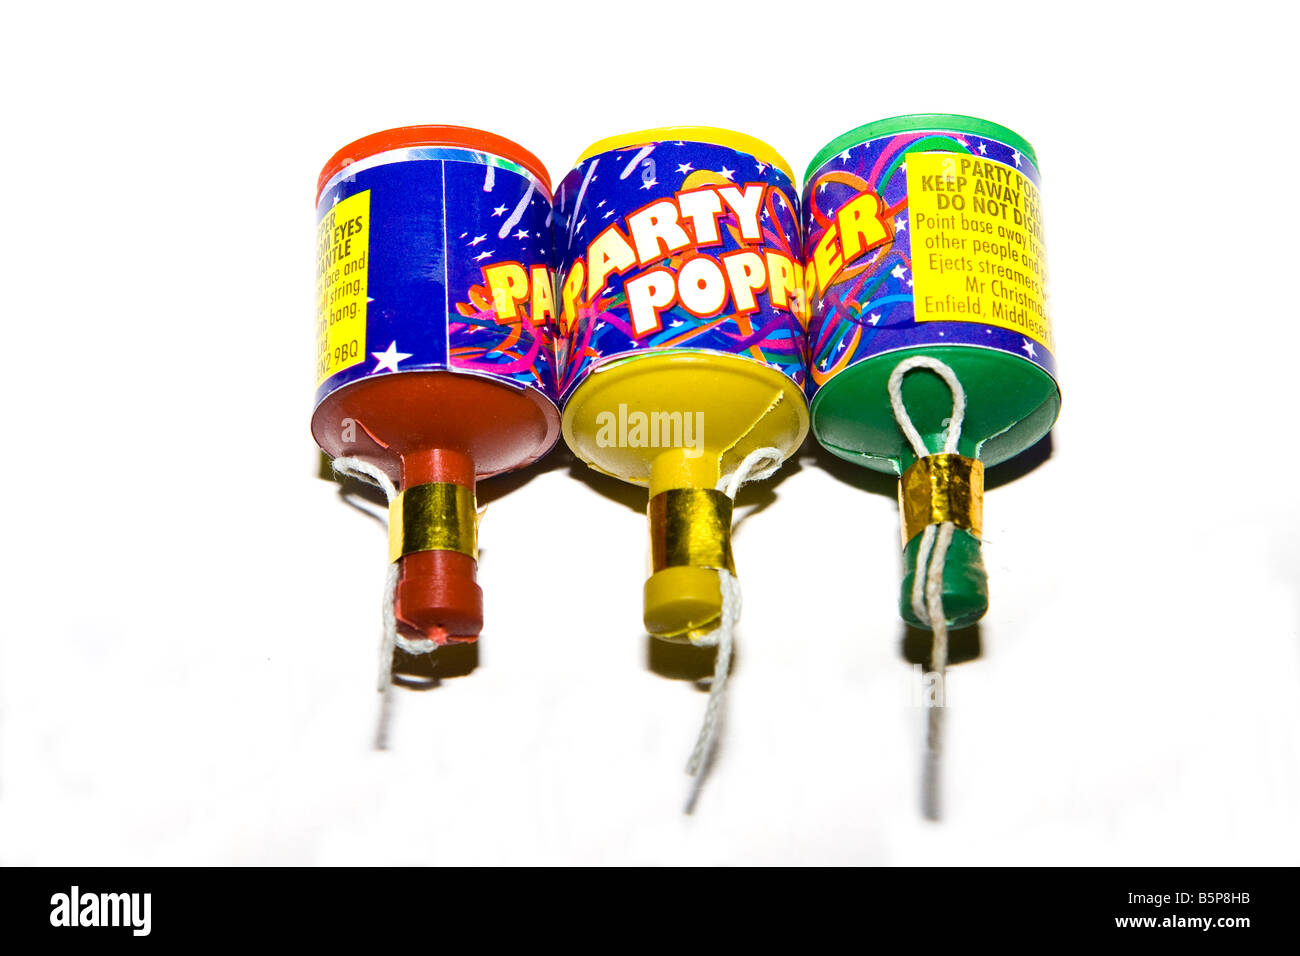 Three Party poppers Stock Photo